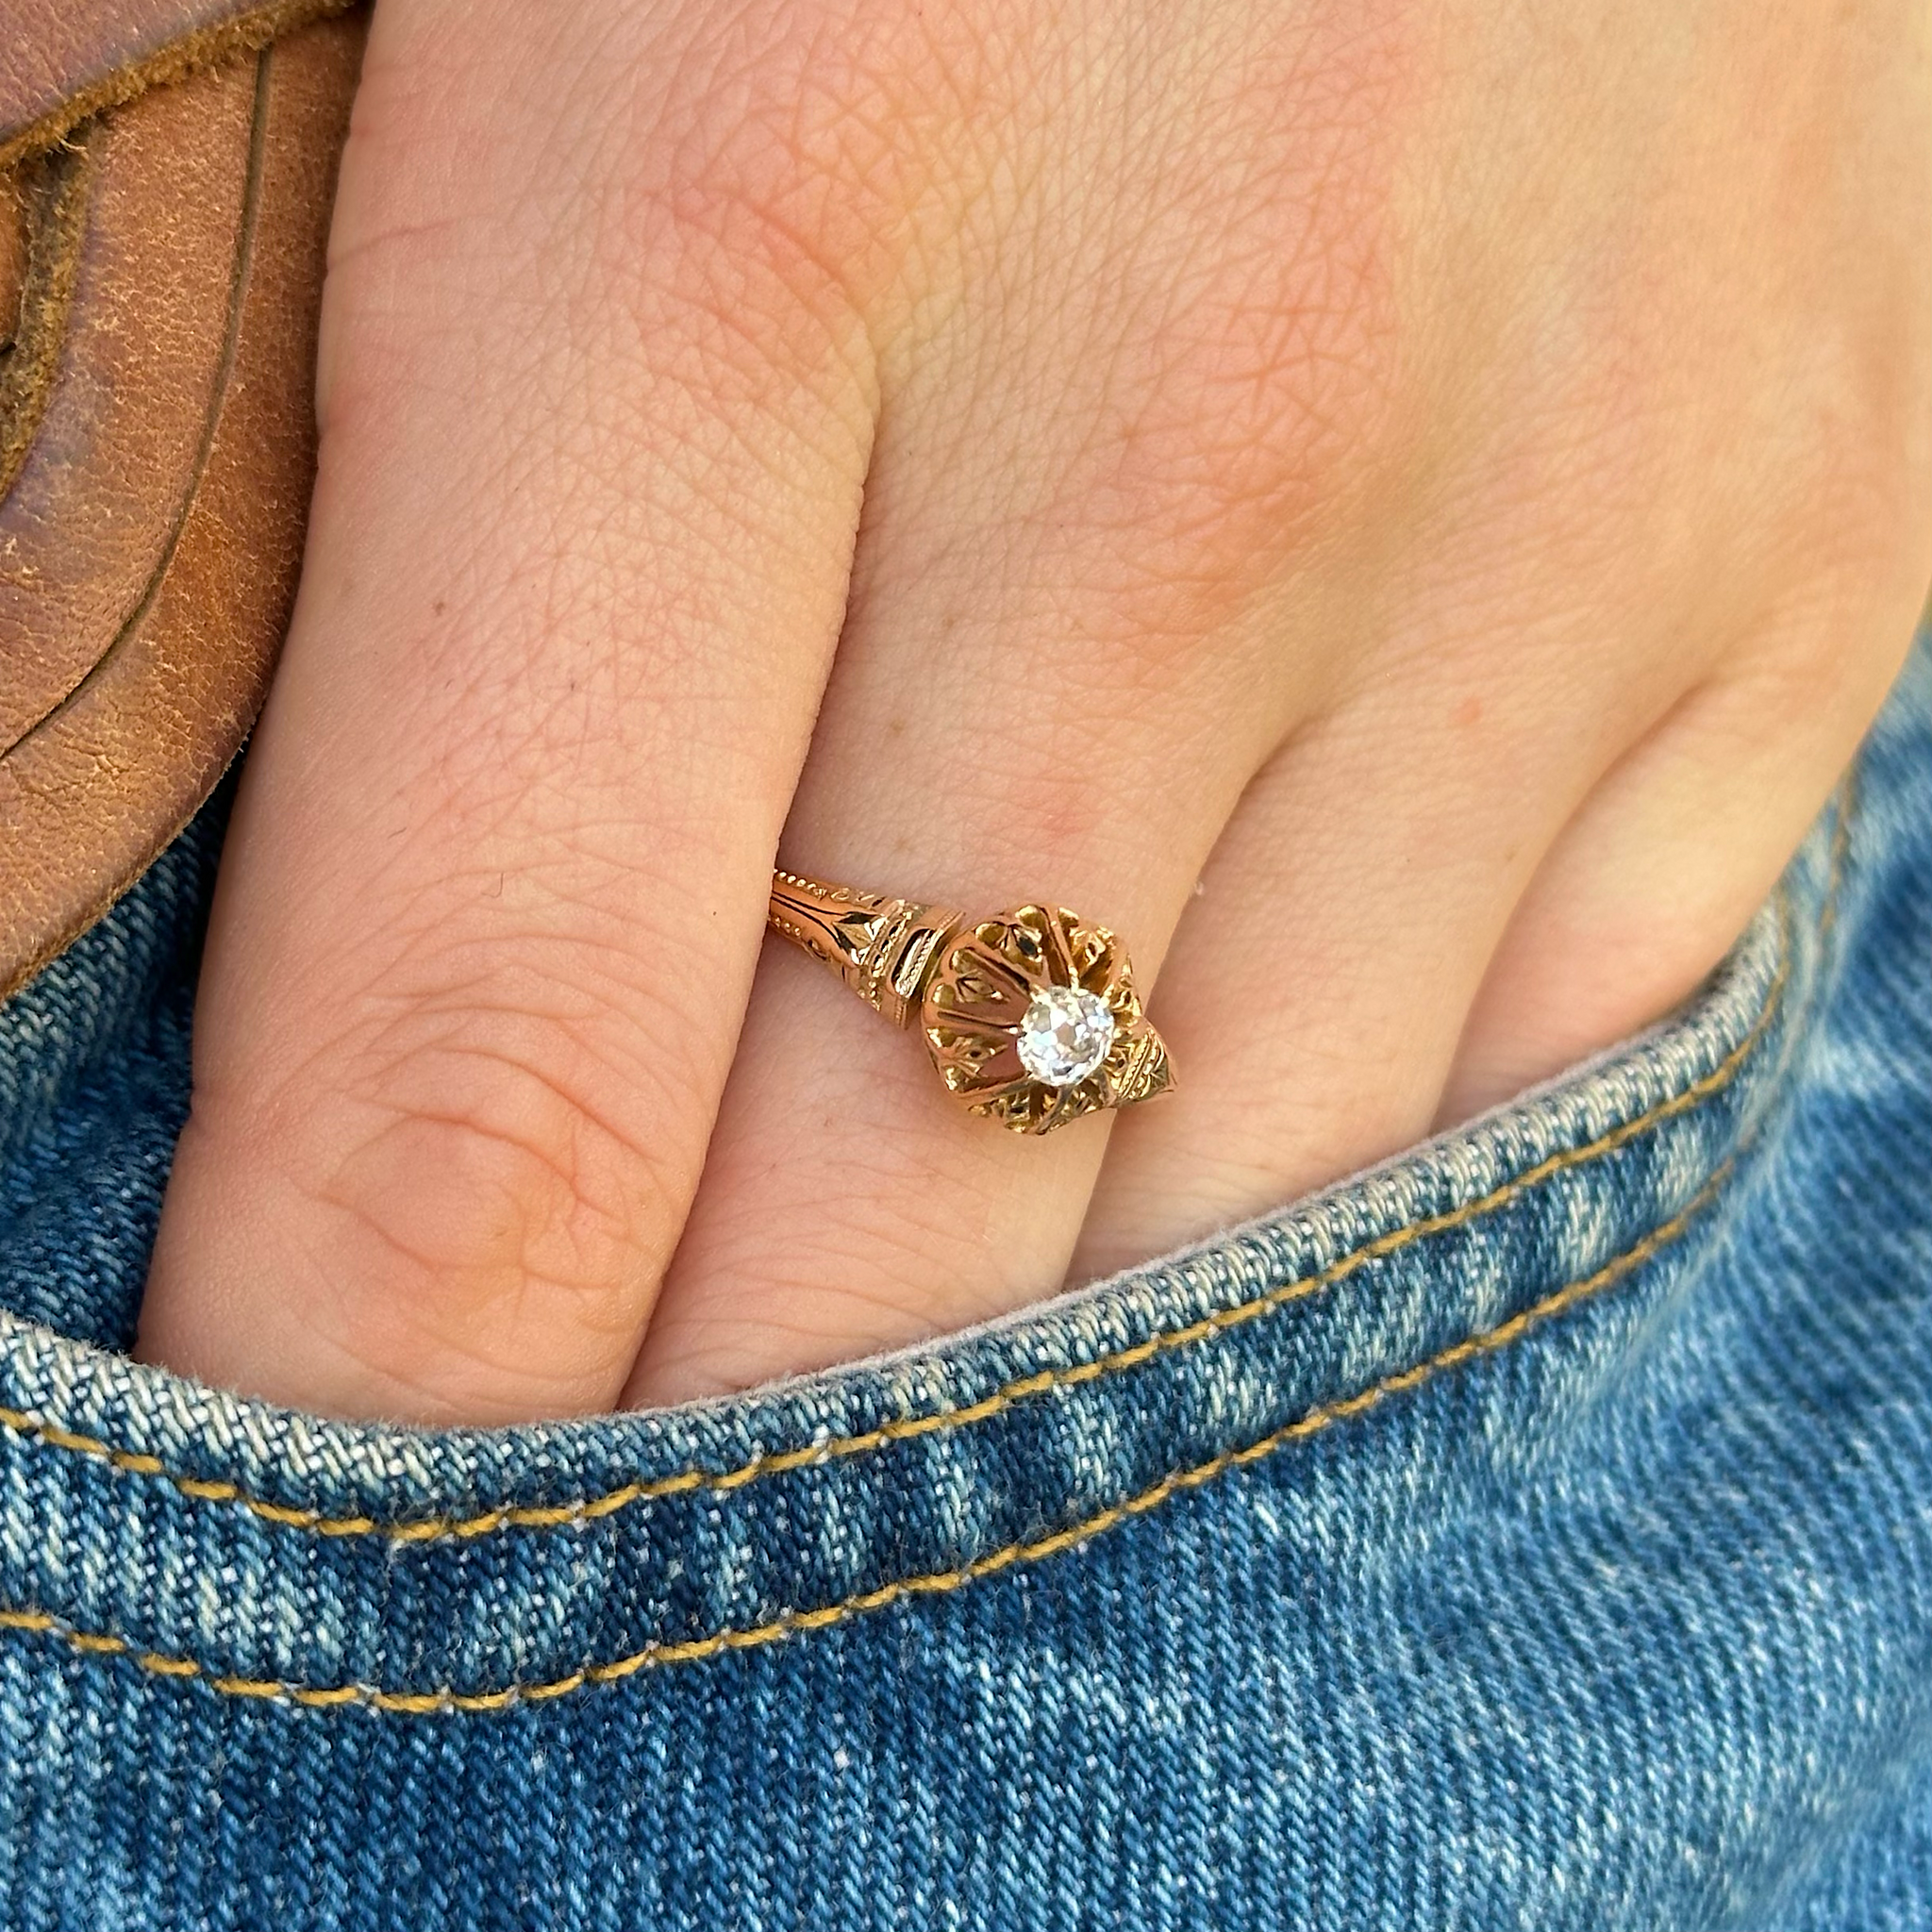 Antique, Victorian, Solitaire Diamond Engagement Ring, 18ct Yellow Gold worn on hand in pocket of jeans